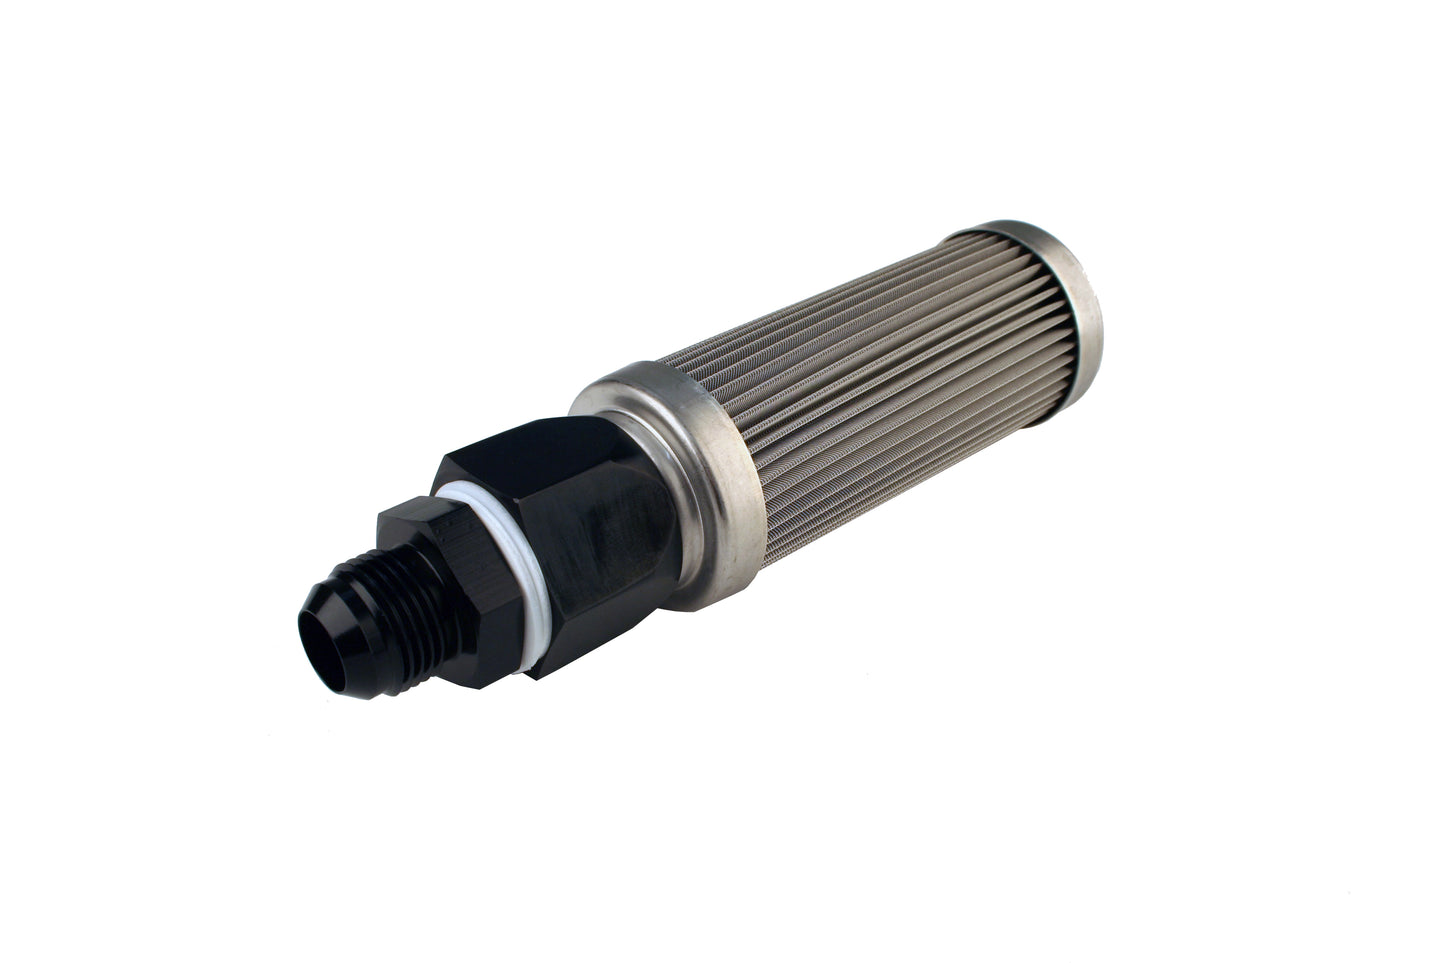 100-micron Stainless Steel Bulkhead Fuel Filter, AN-10 Male Flare